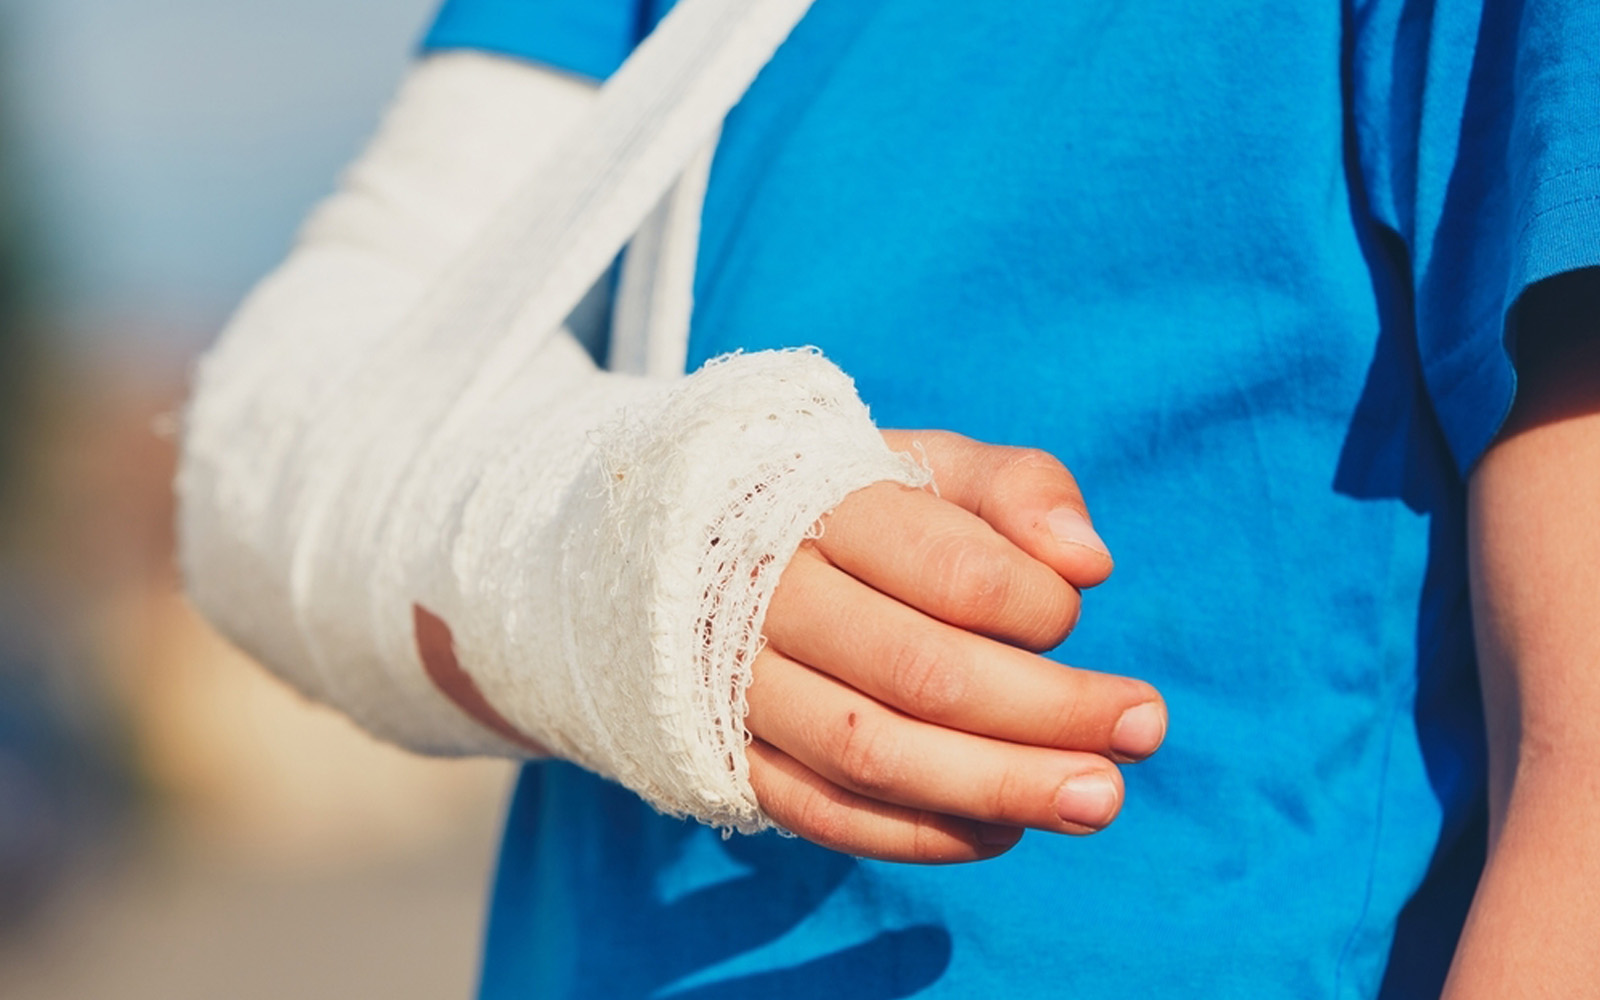 an image of a child with an injured arm